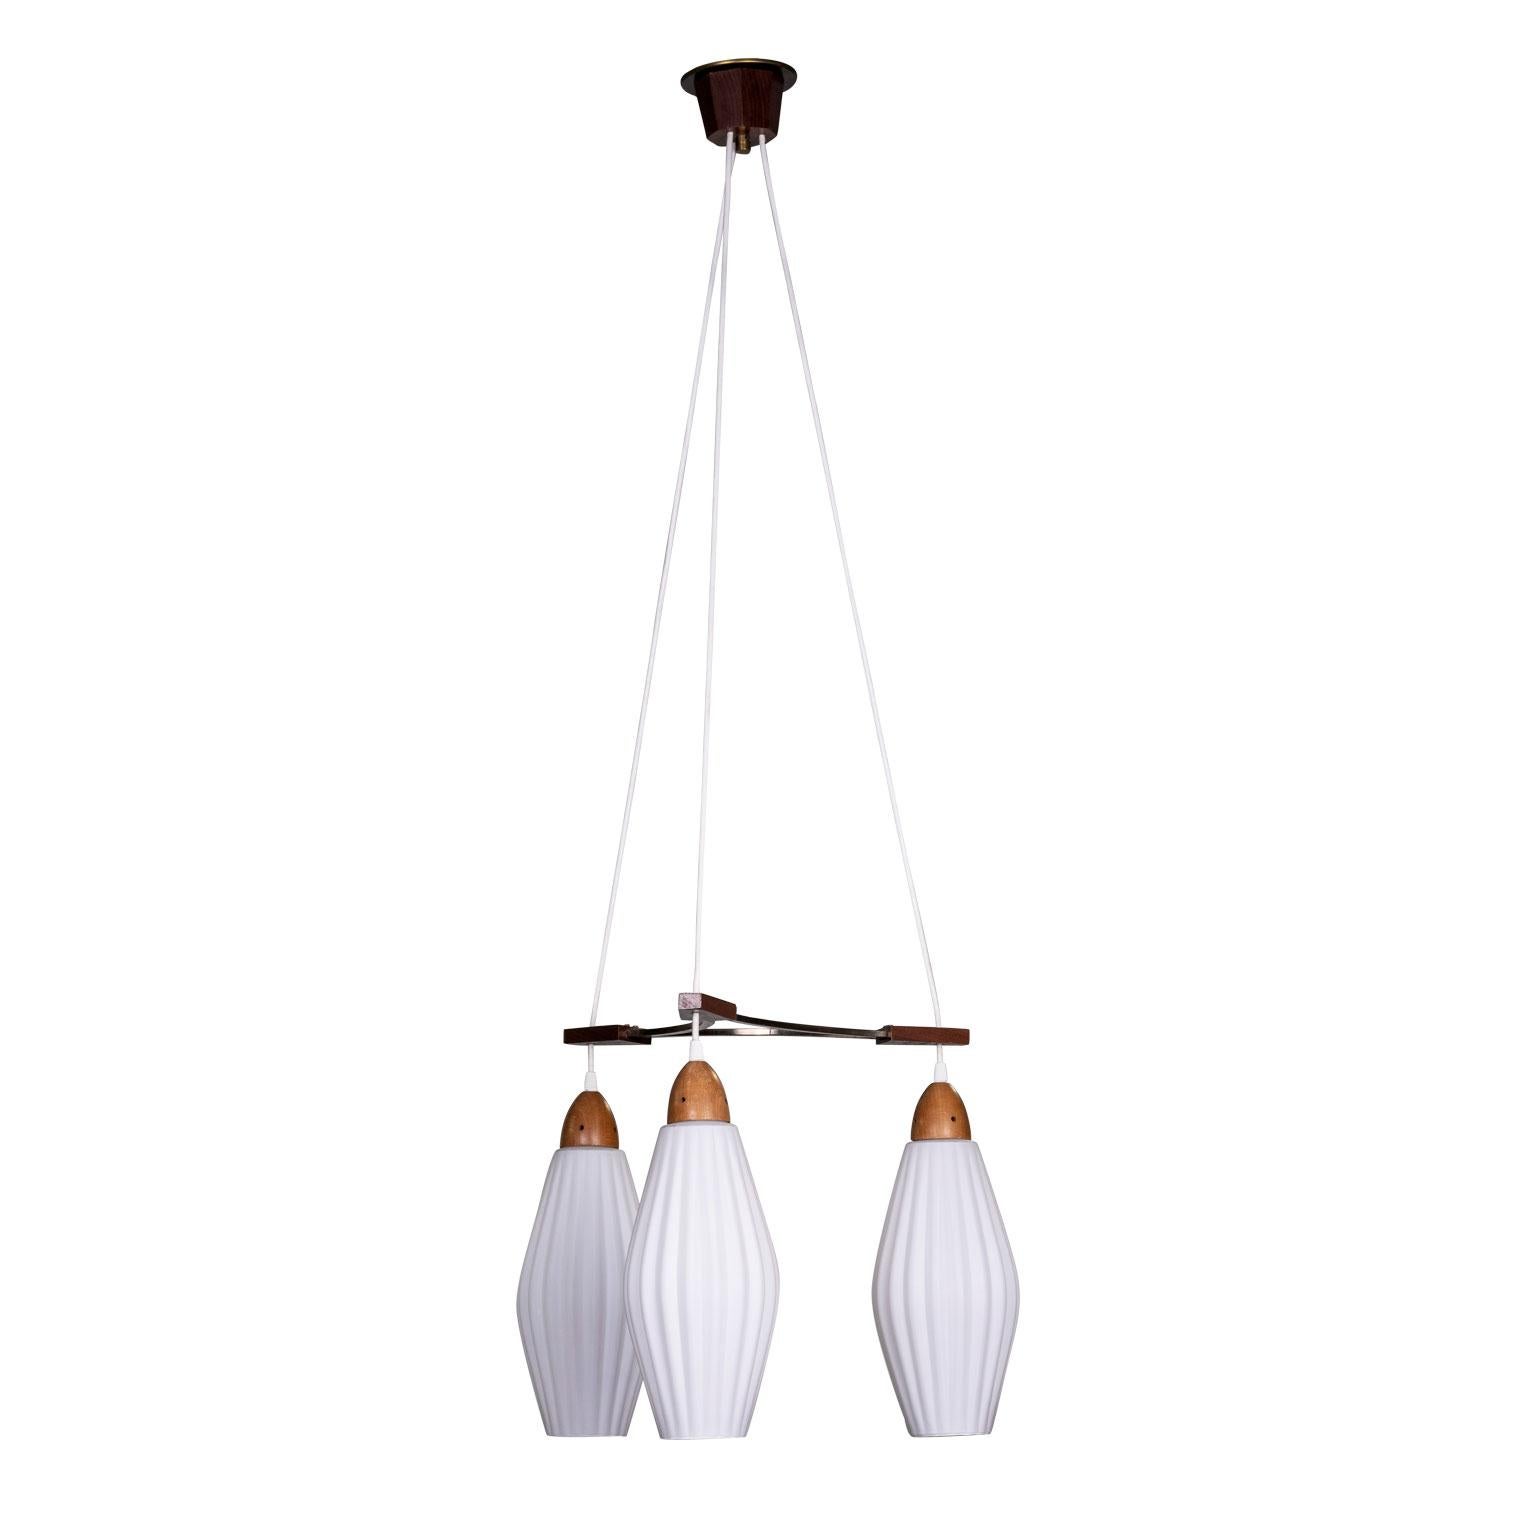 Swedish Mid-Century Modern triple pendant light by Luxus, circa 1960s. Teak and metal fixture with frosted glass shades. Newly wired for use within the USA using UL listed parts.